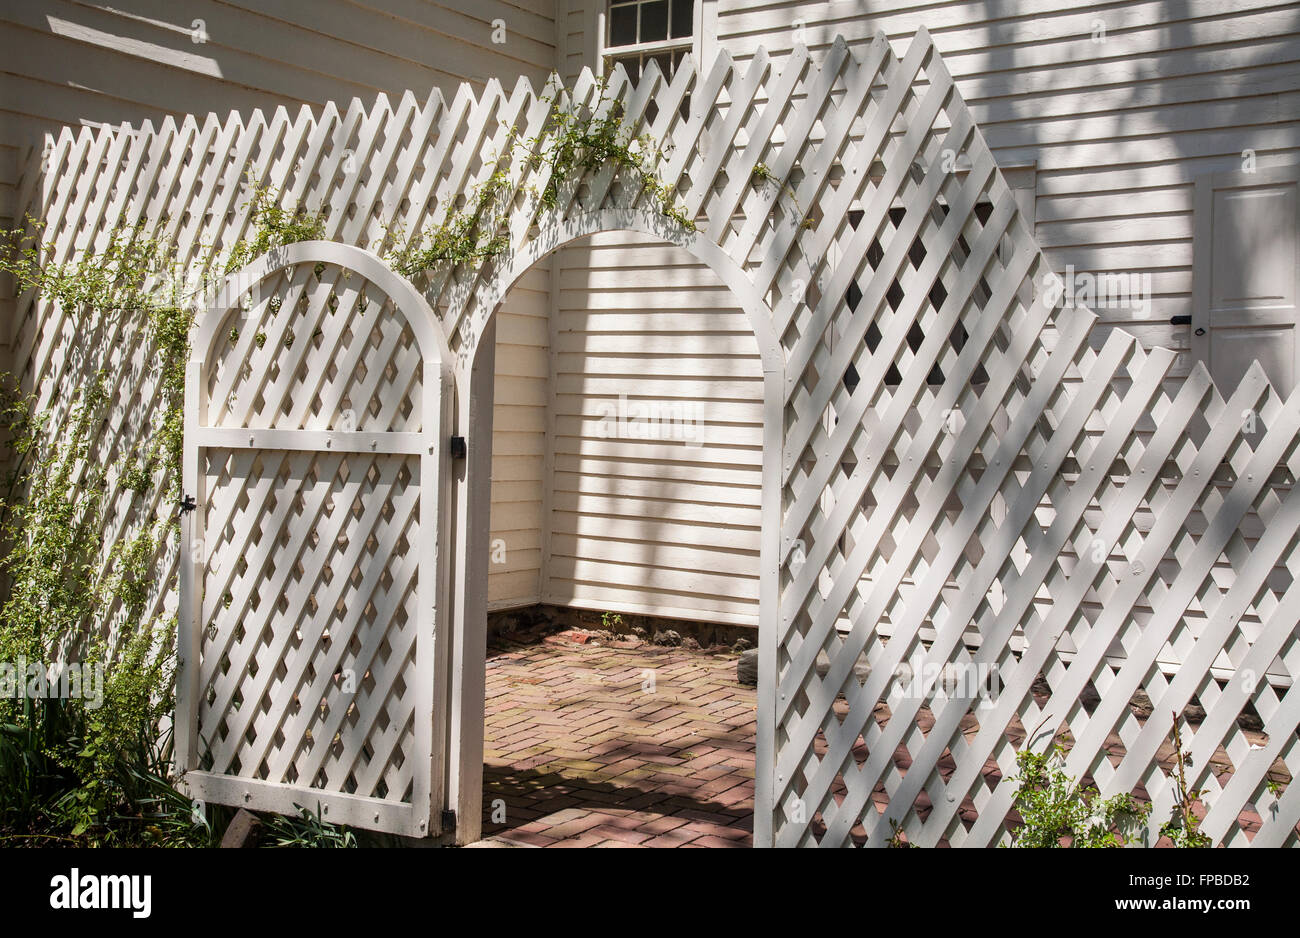 Vintage white lattice fence wall and wooden garden gate of a garden room, Freehold Township, Monmouth County, New Jersey, USA, US,  privacy fence Stock Photo